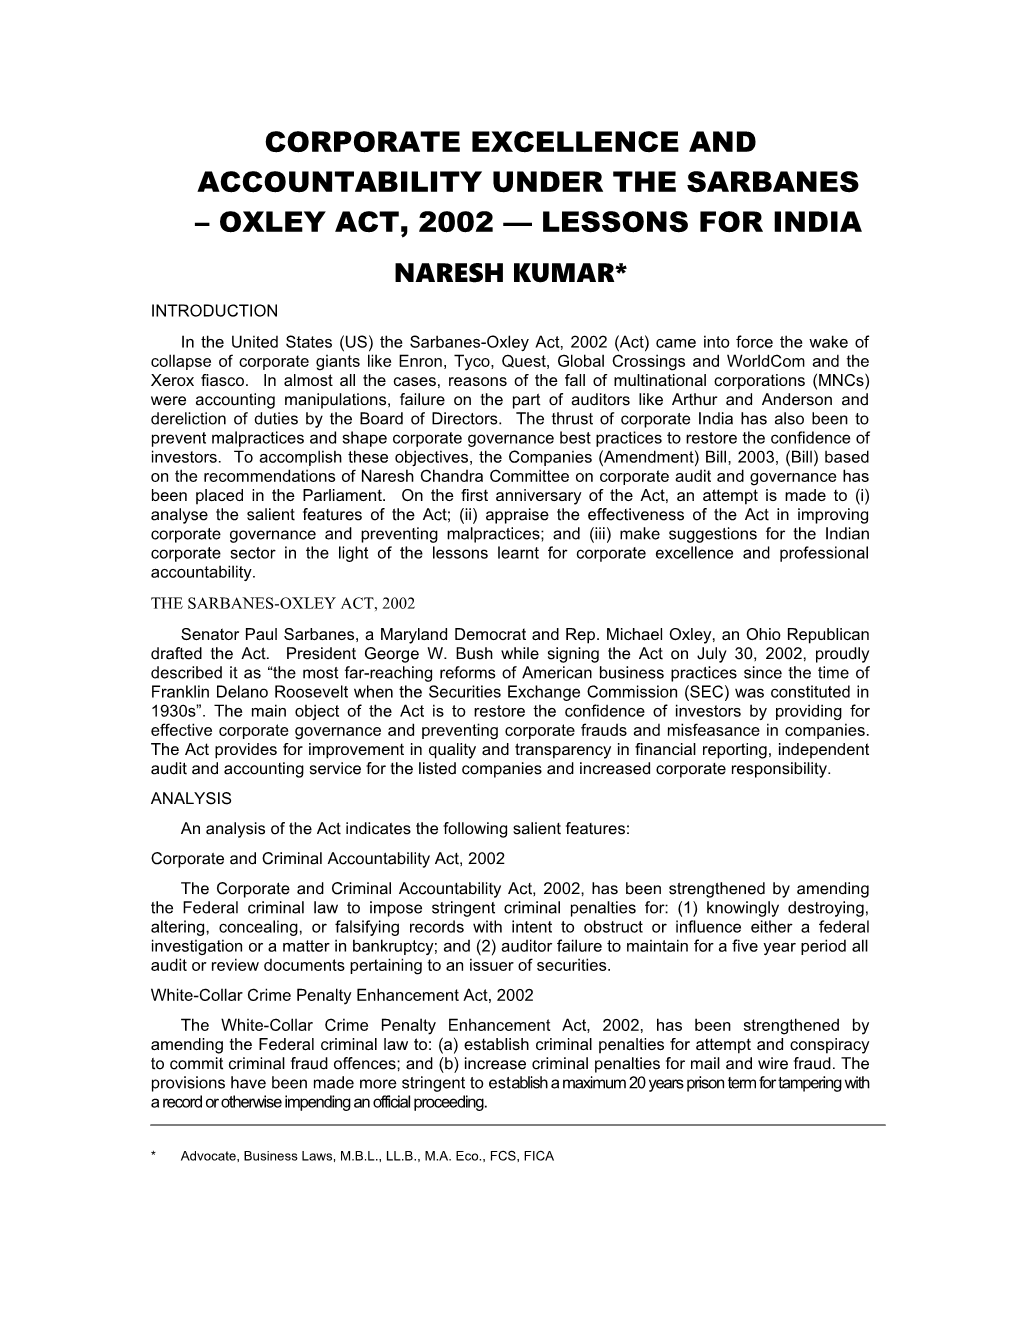 Corporate Excellence and Accountability Under the Sarbanes Oxley Act, 2002 Lessons for India